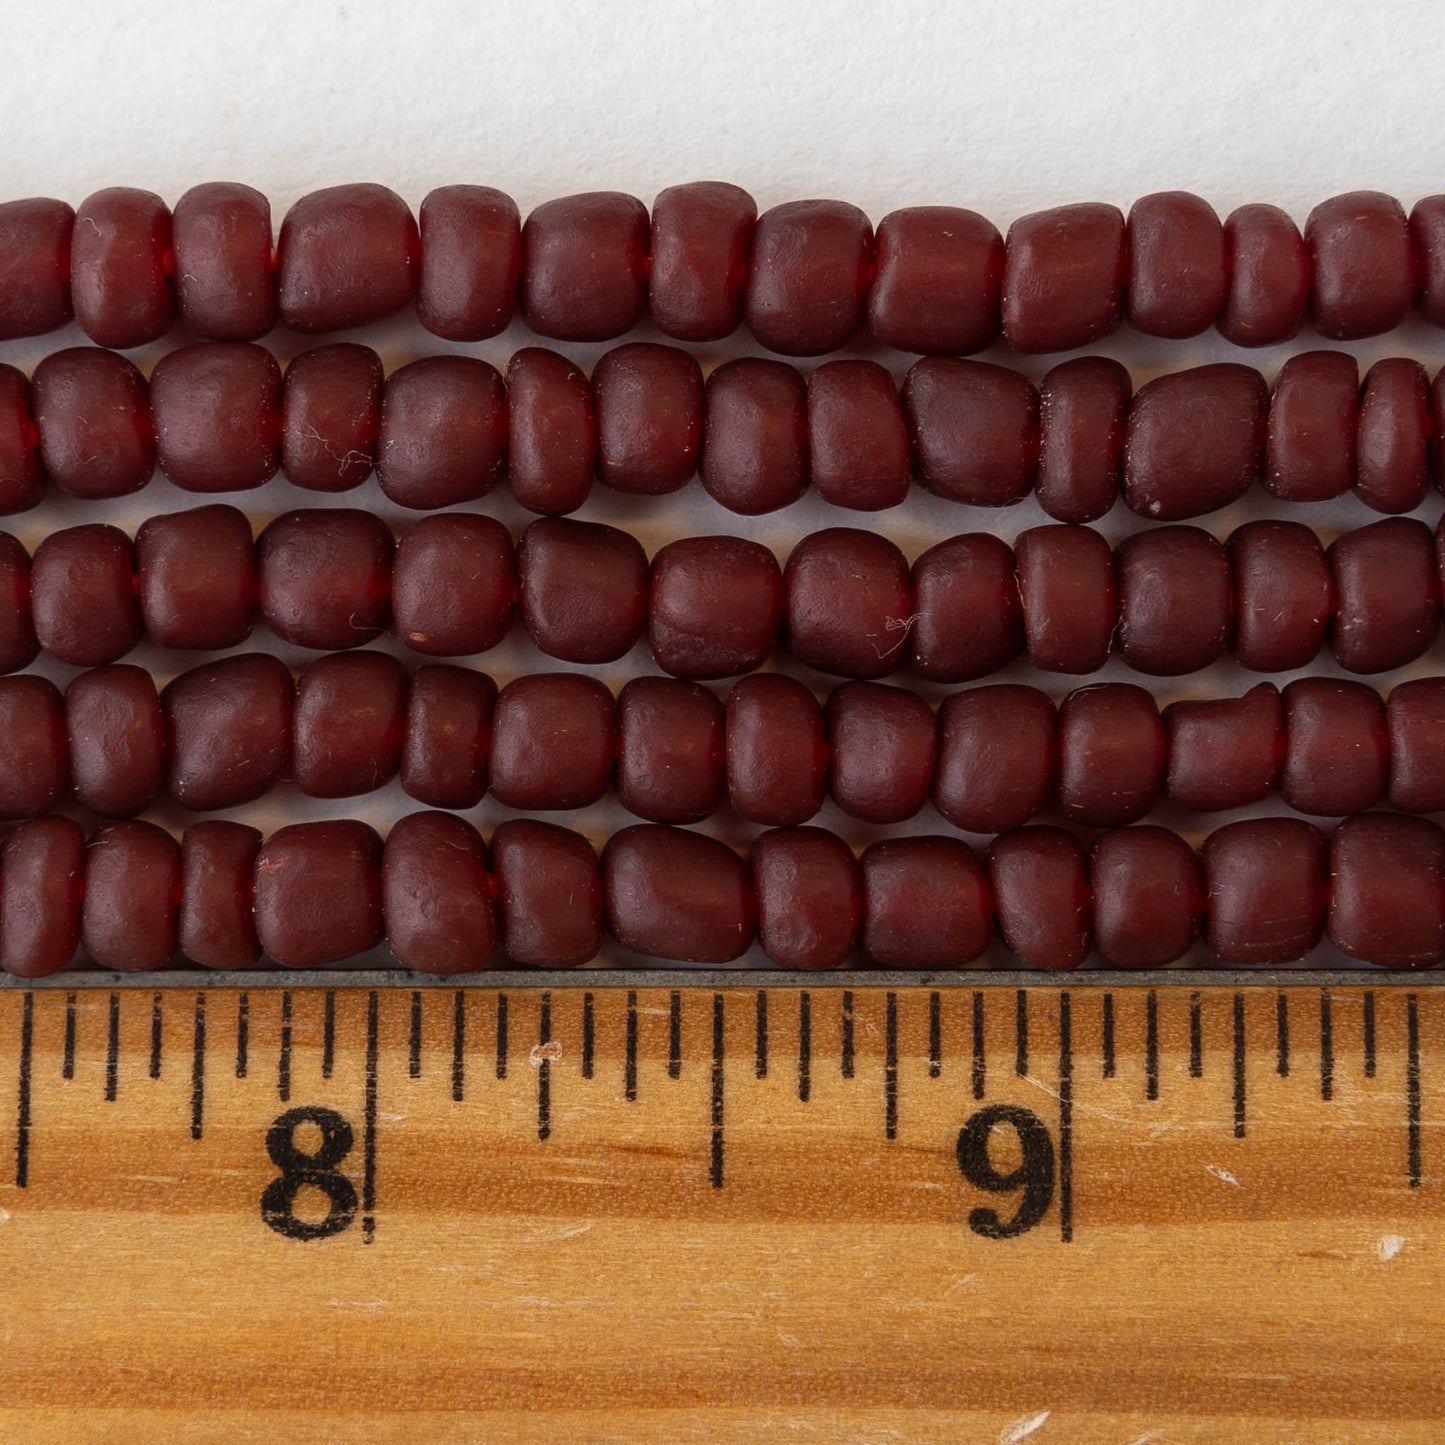 Java Trade Beads -Opaque Dark Red - 12 Inches